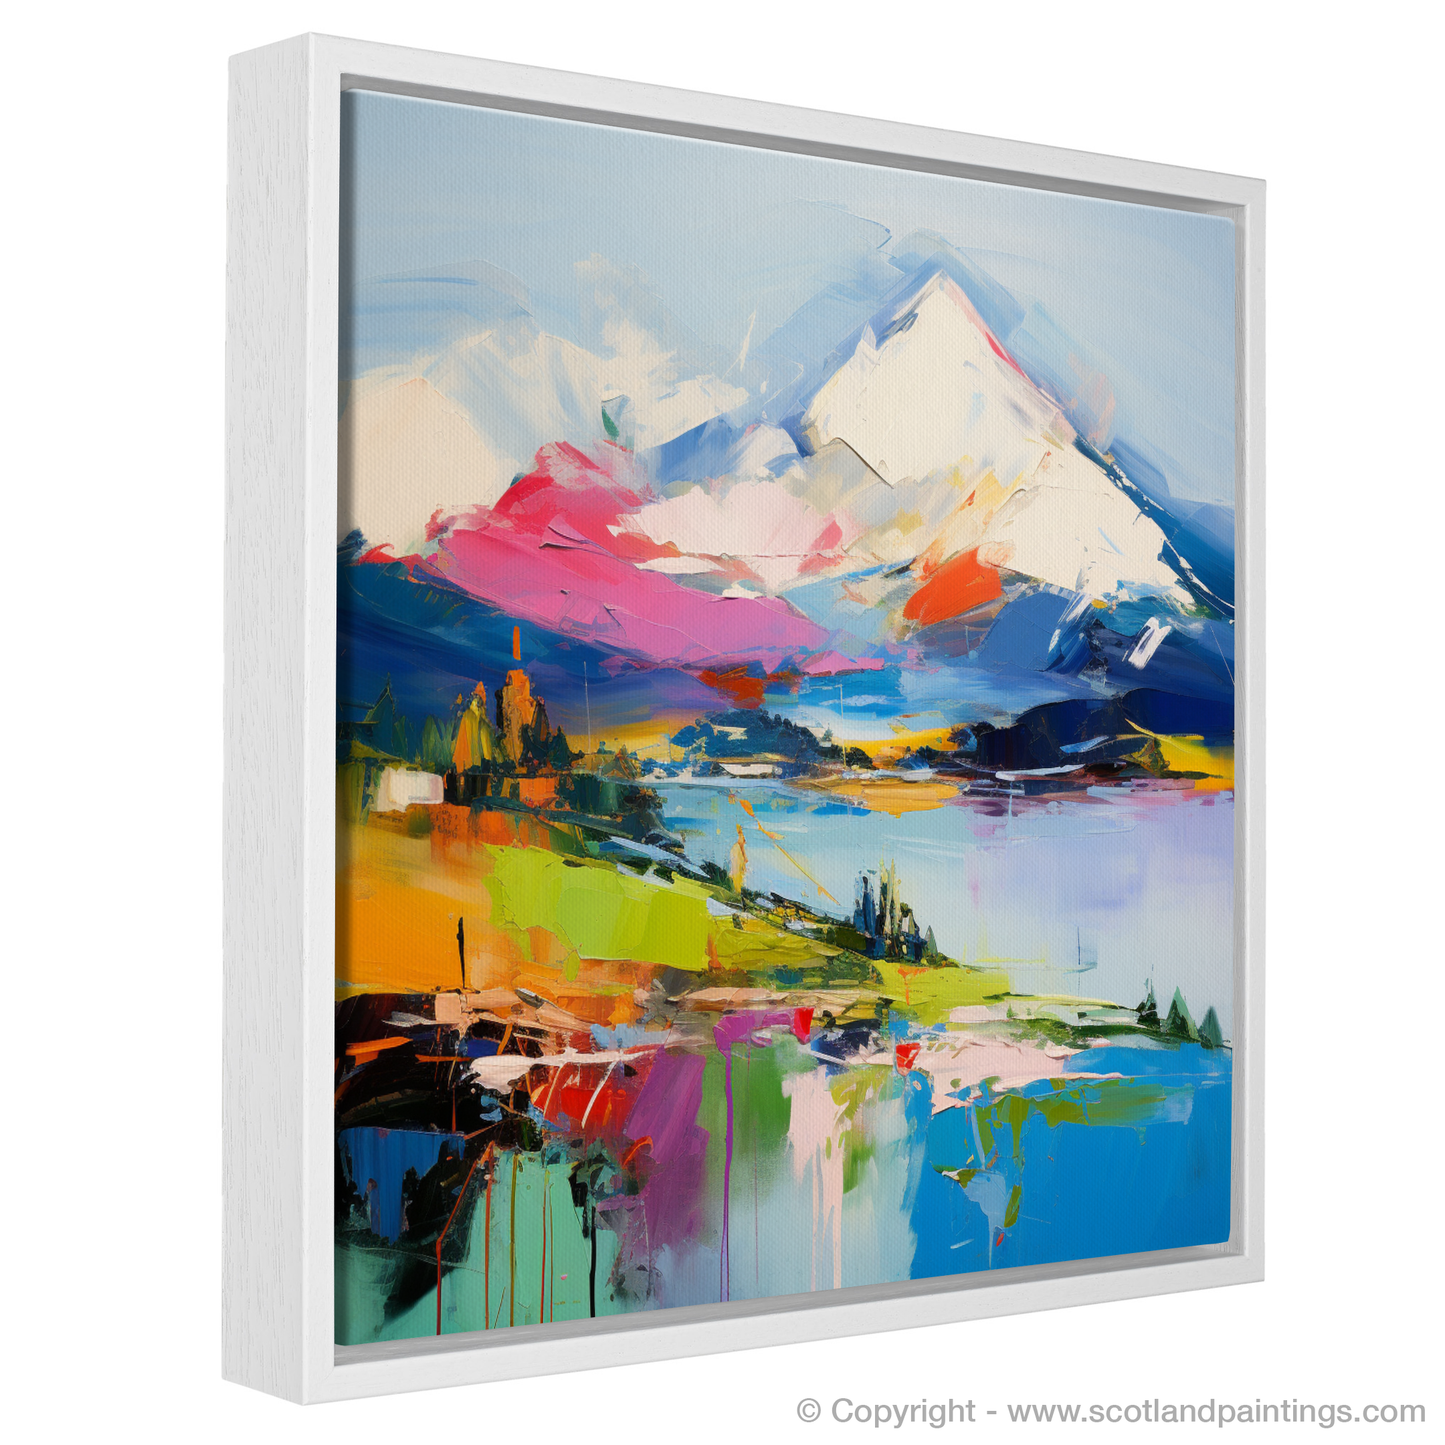 Painting and Art Print of Snow-capped peaks overlooking Loch Lomond entitled "Snow-Capped Majesty: An Abstract Impression of Loch Lomond".